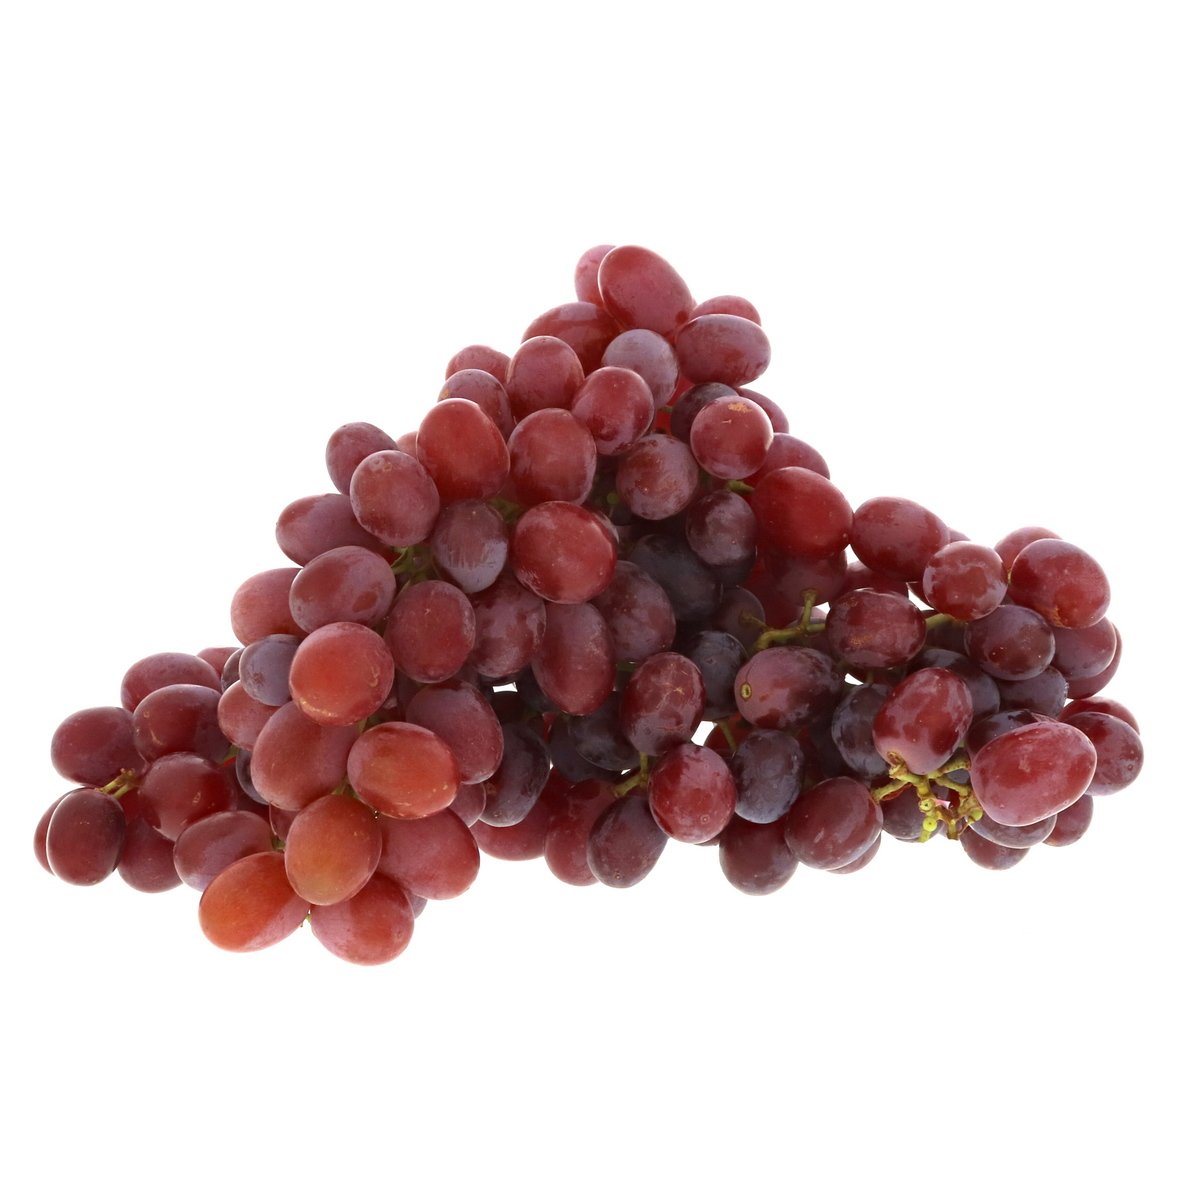 Buy Grapes Red 500 g Online at Best Price | Grapes | Lulu KSA in Kuwait